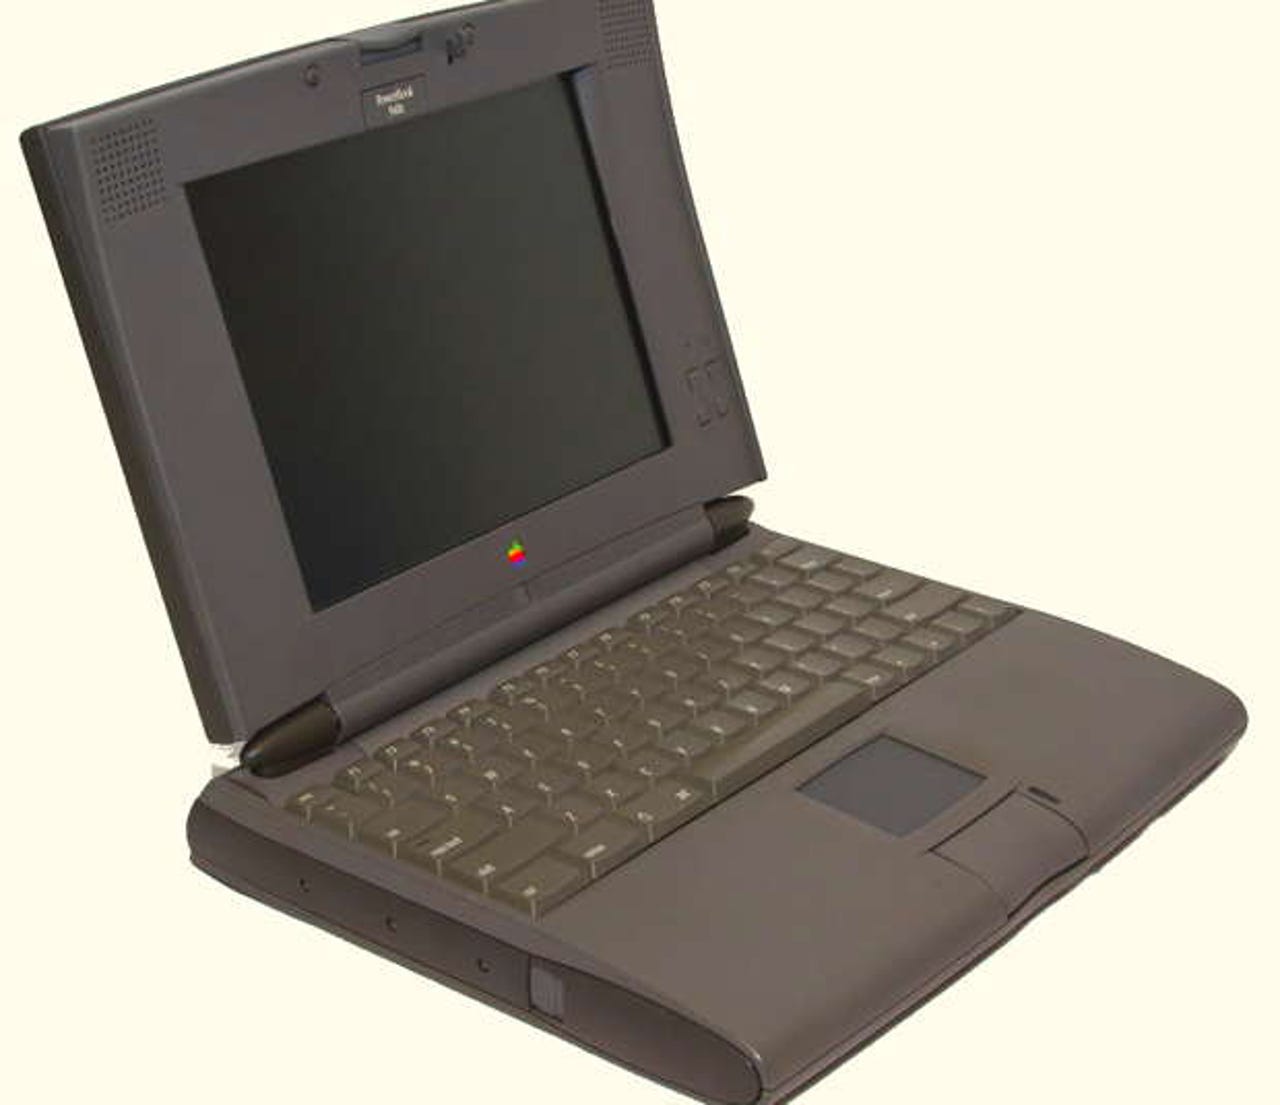 Wayback Mac: Remembering the first trackpad laptop